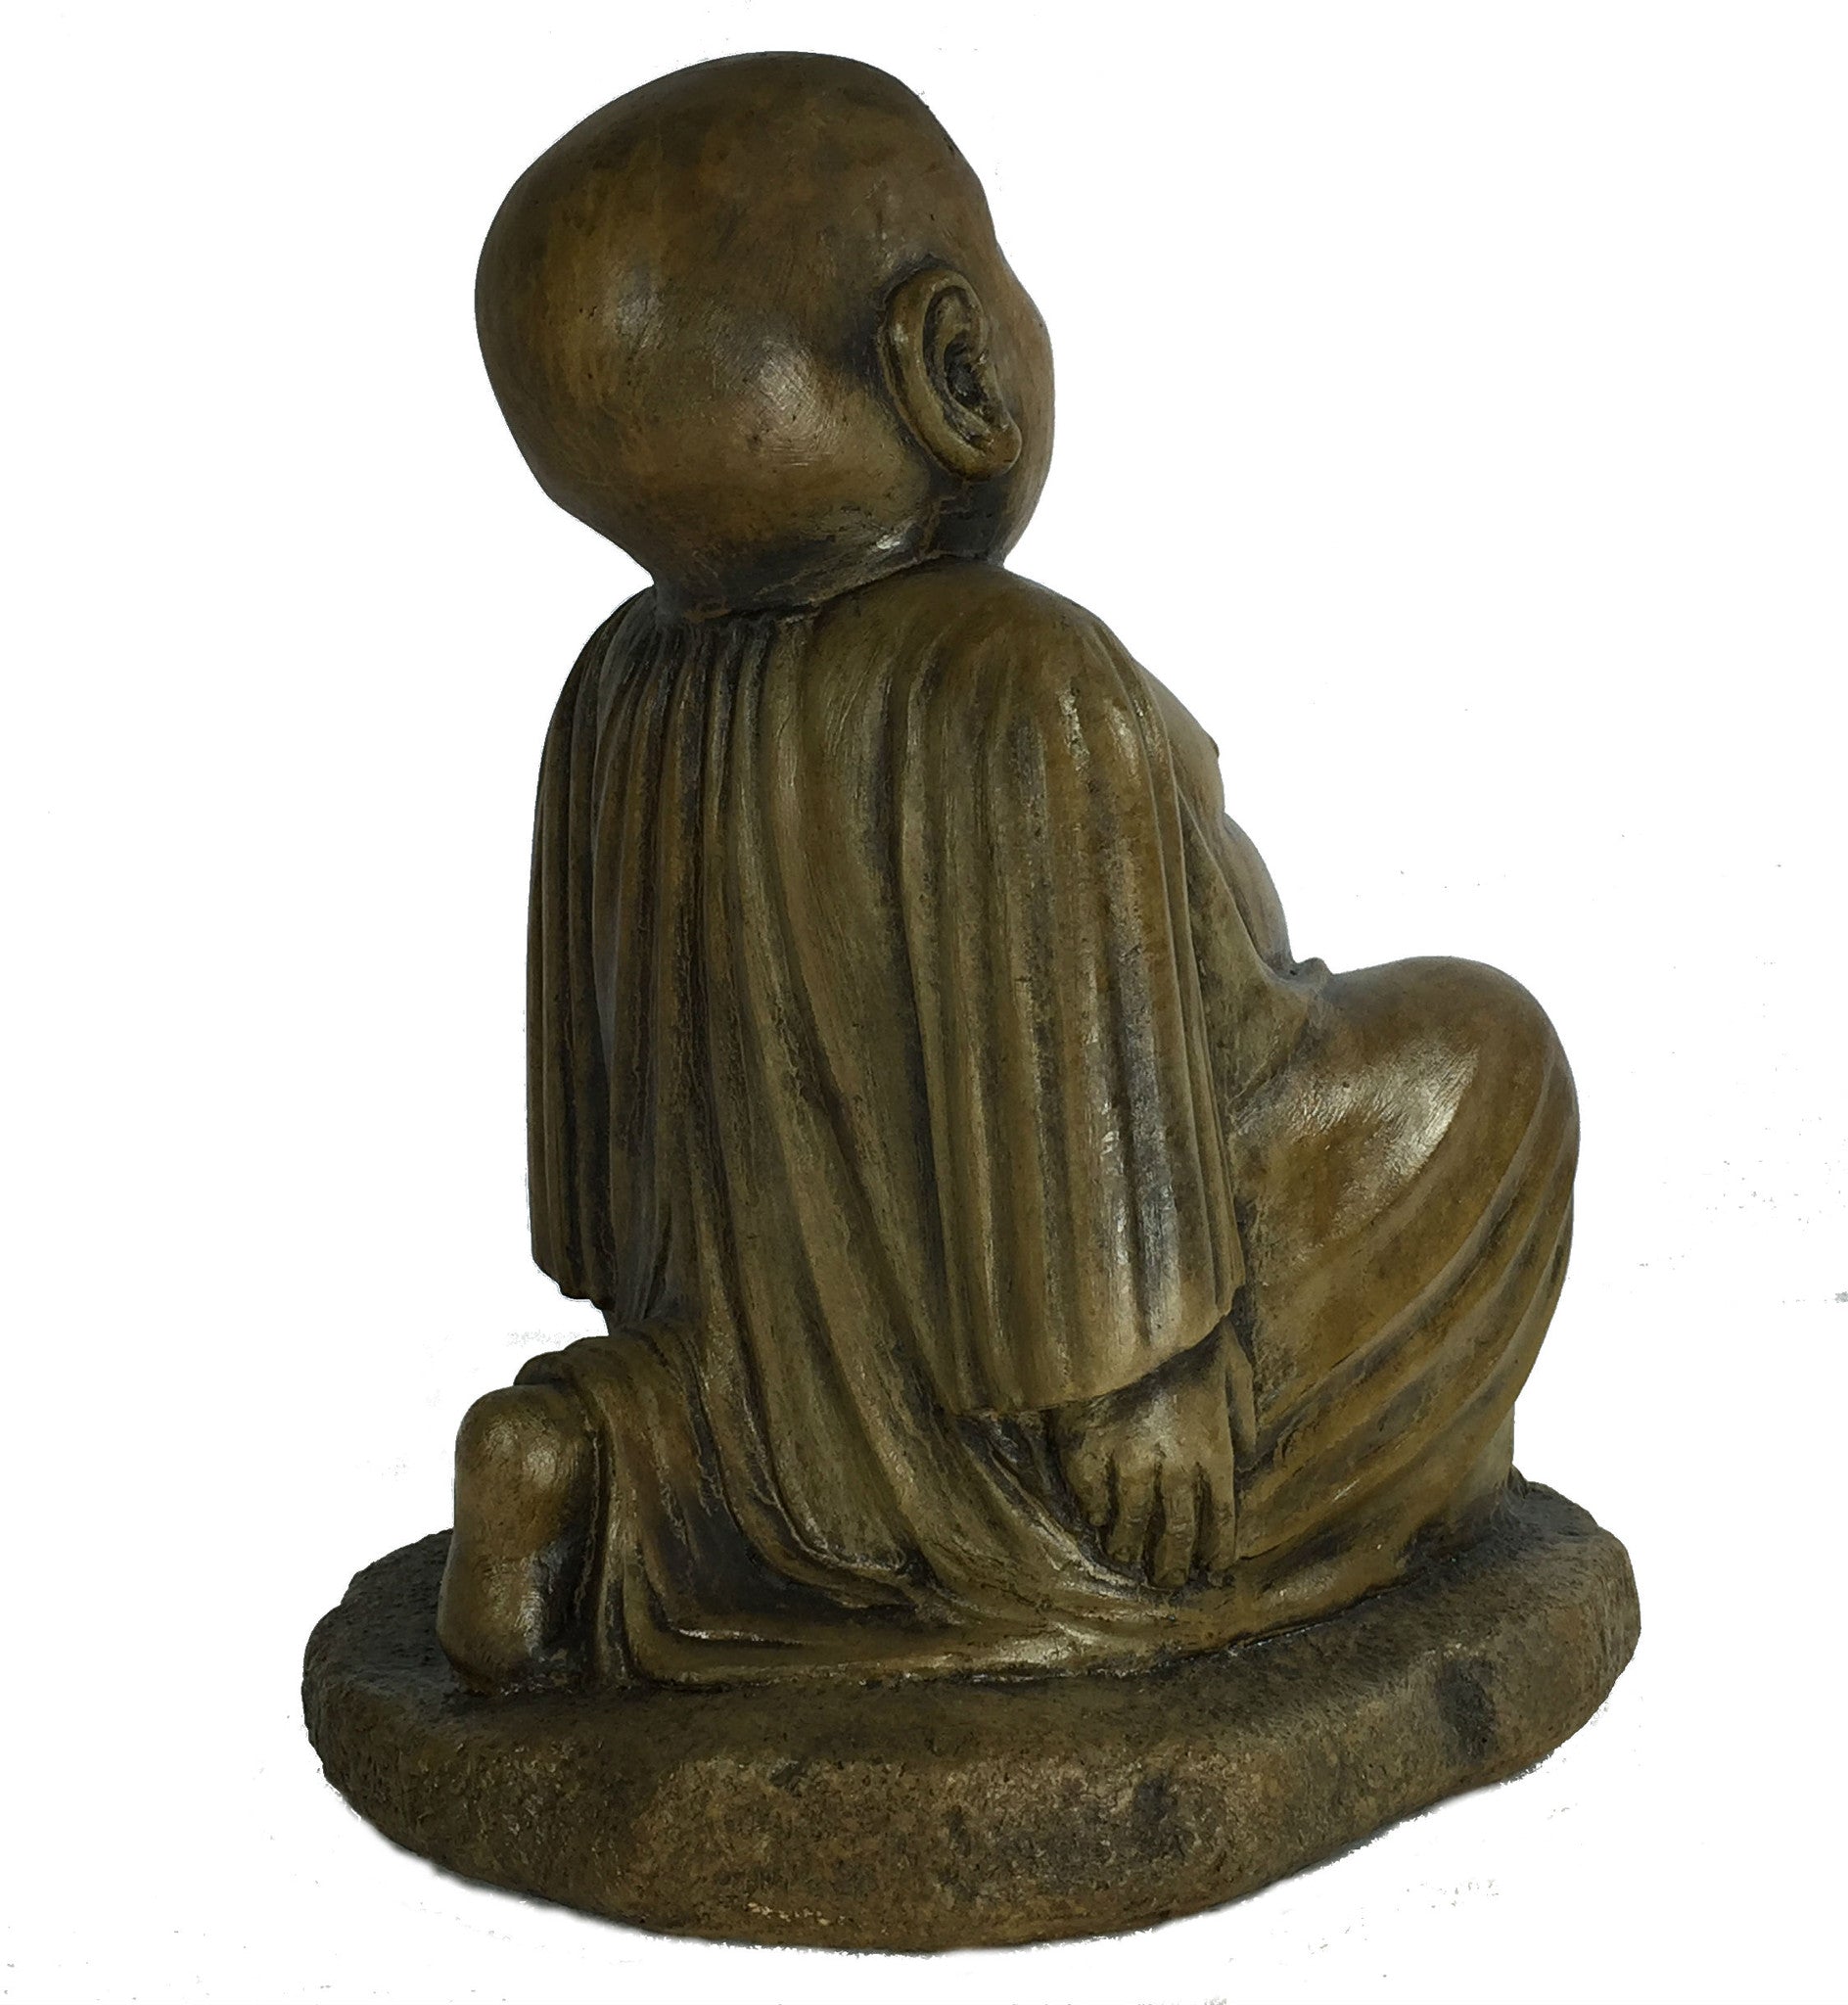 Yoga Buddha - Lunge Position in Ancient Stone